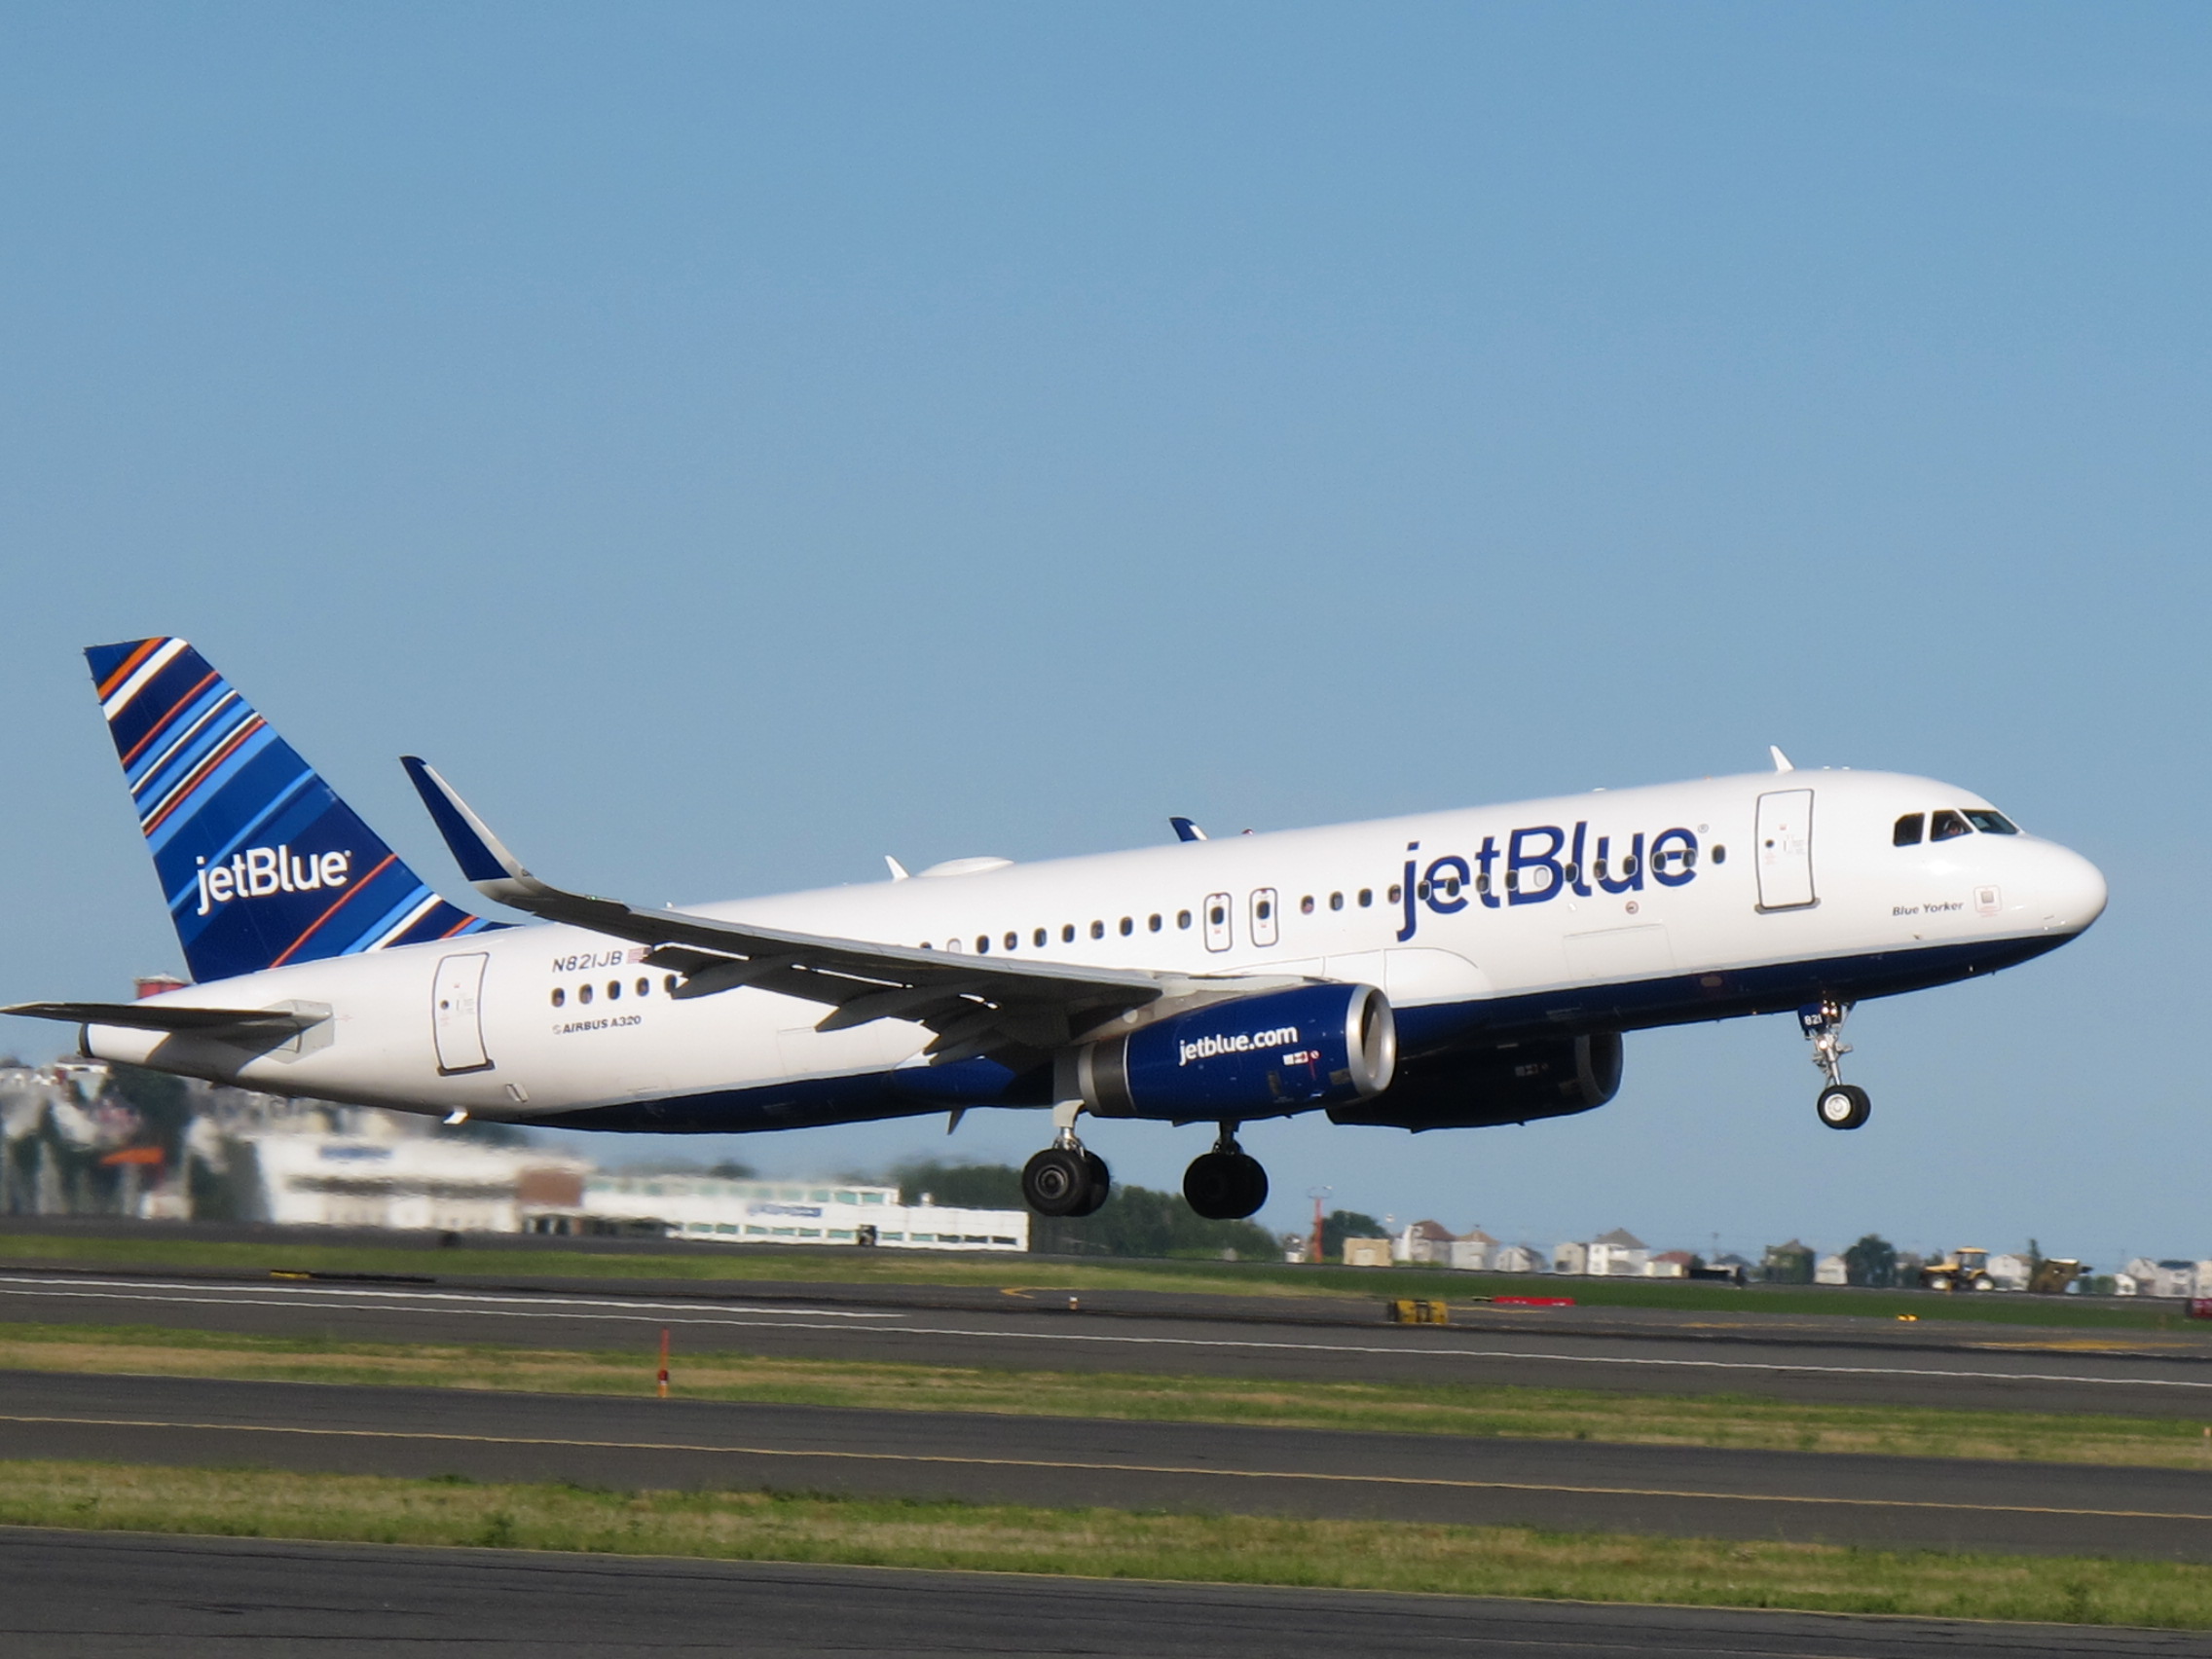 JetBlue's Cyber Monday Deal Has One-Way Flights for $20